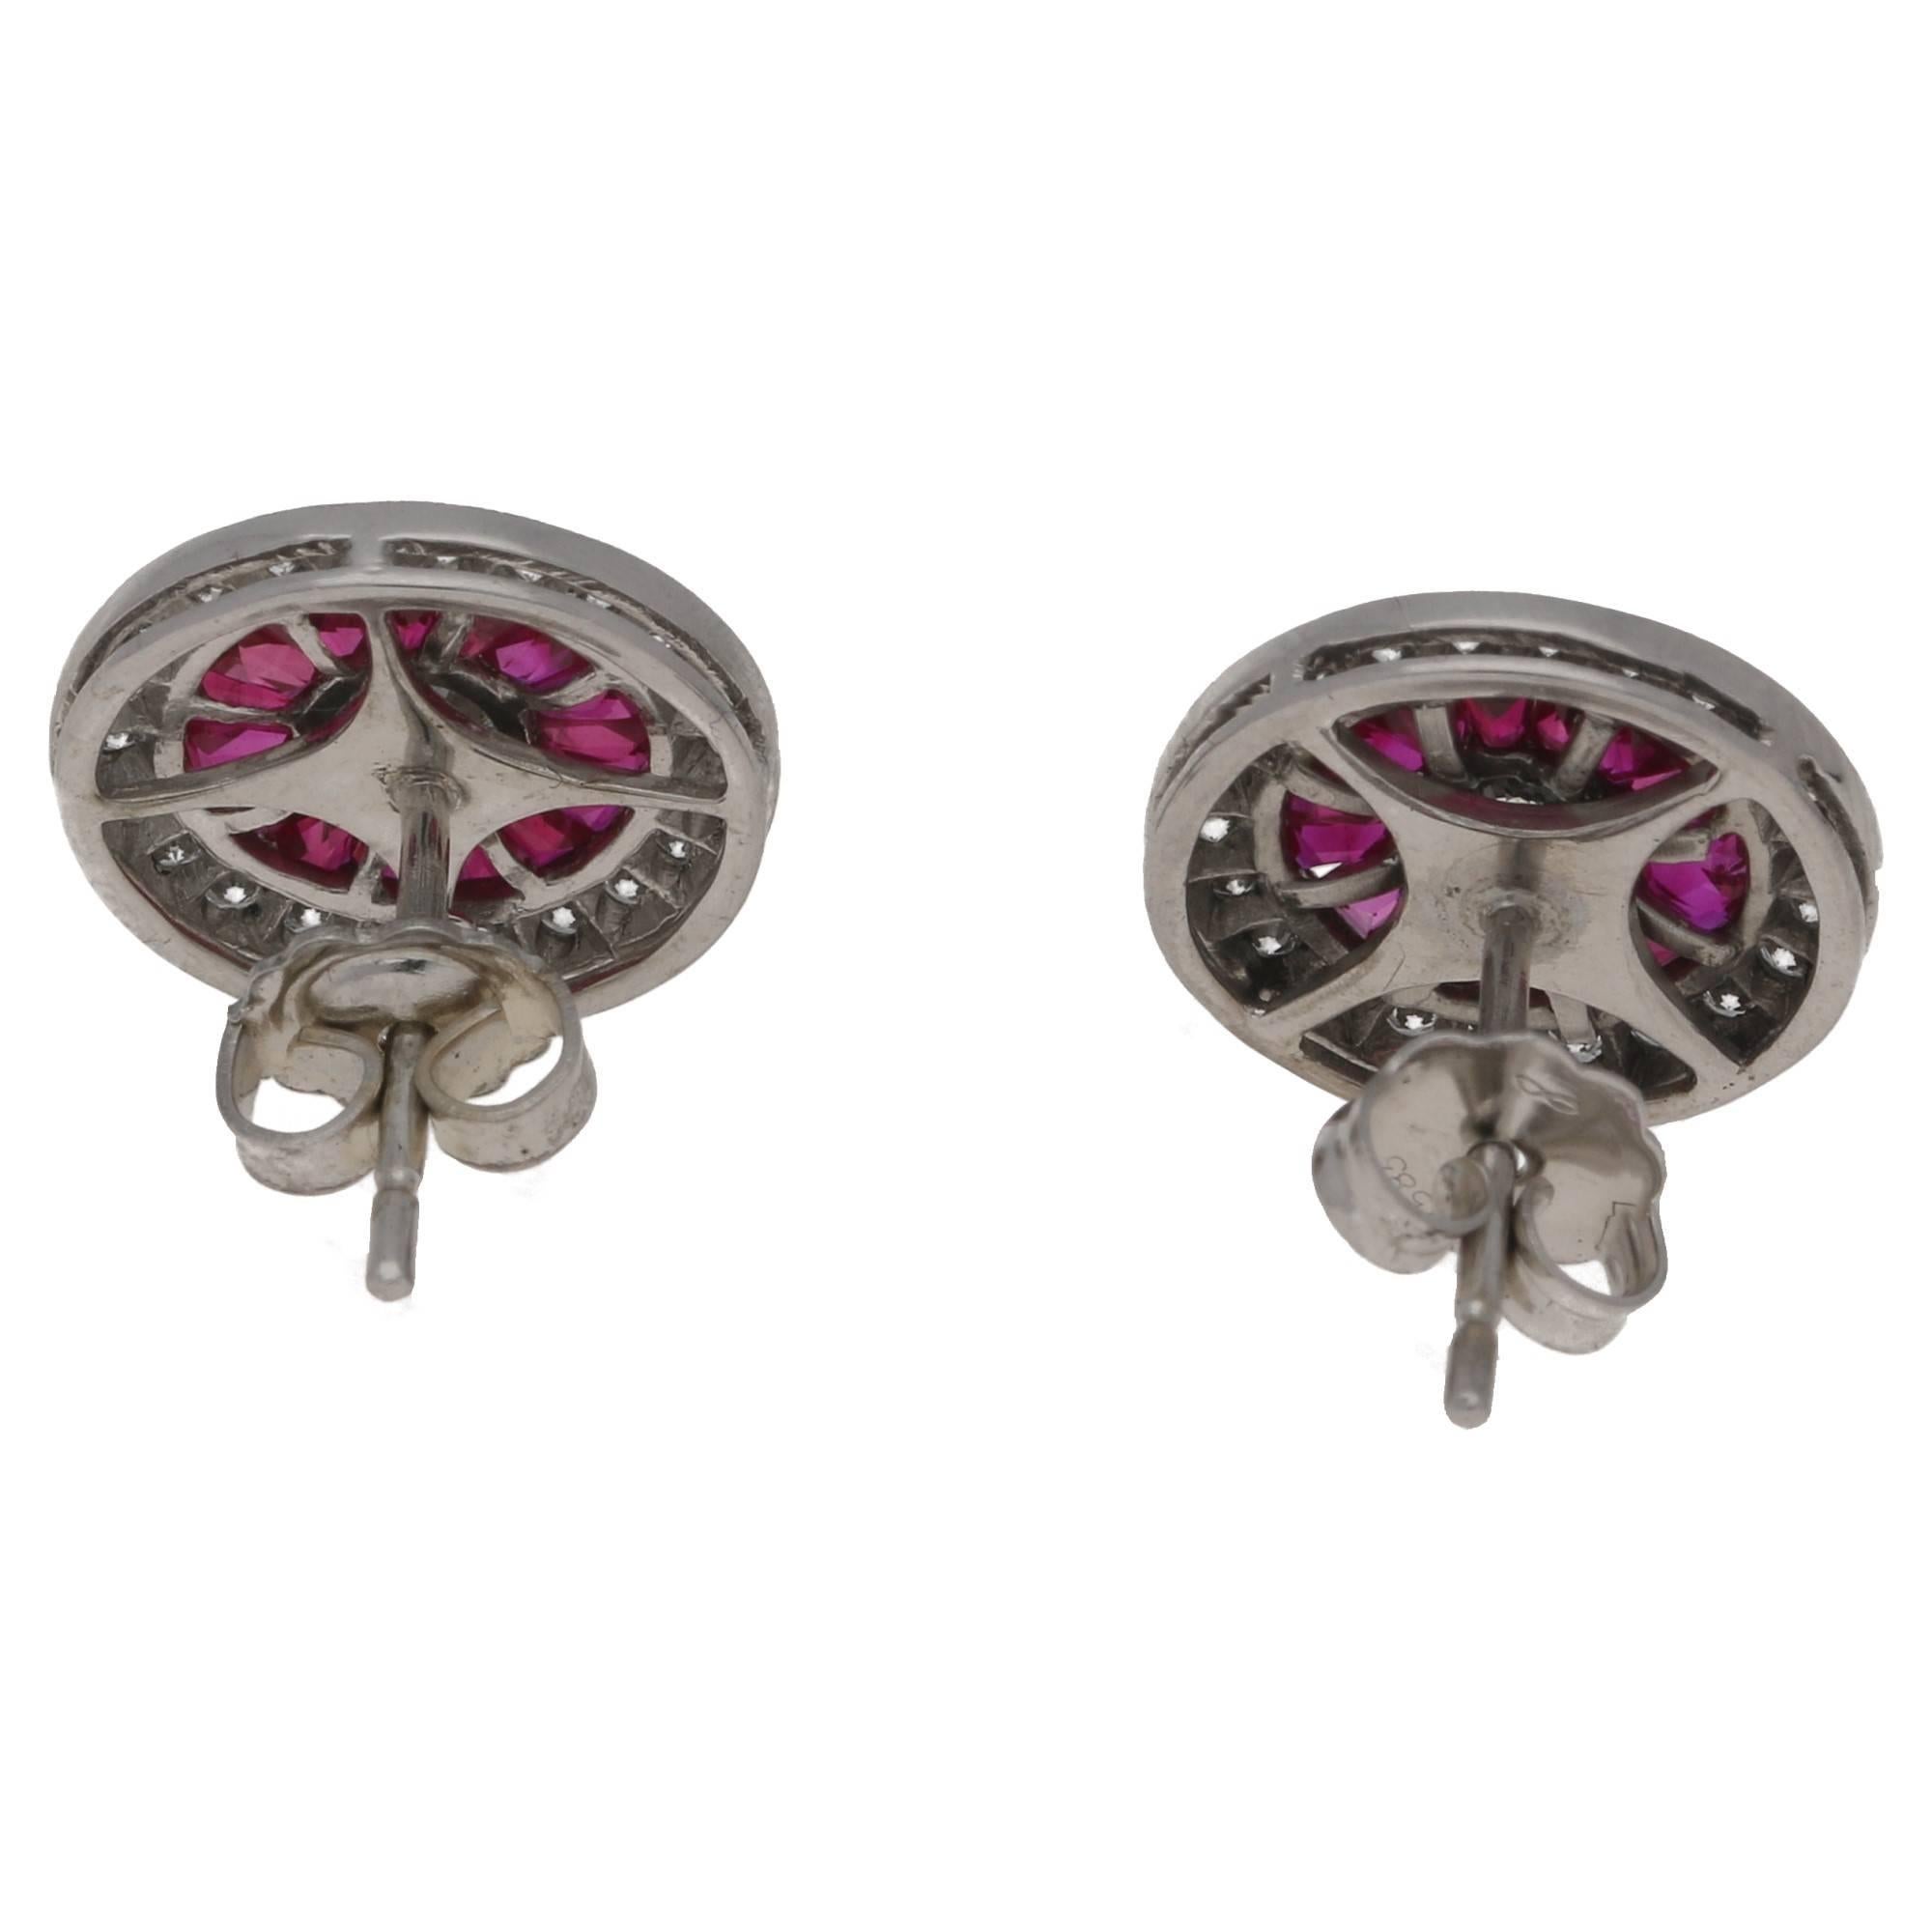 A beautiful pair of ruby and diamond target cluster earrings. The earrings are formed of a round brilliant cut diamond centrally set in a spectacle setting. The central diamond is surrounded buy a row of calibre cut rubies and further embellished